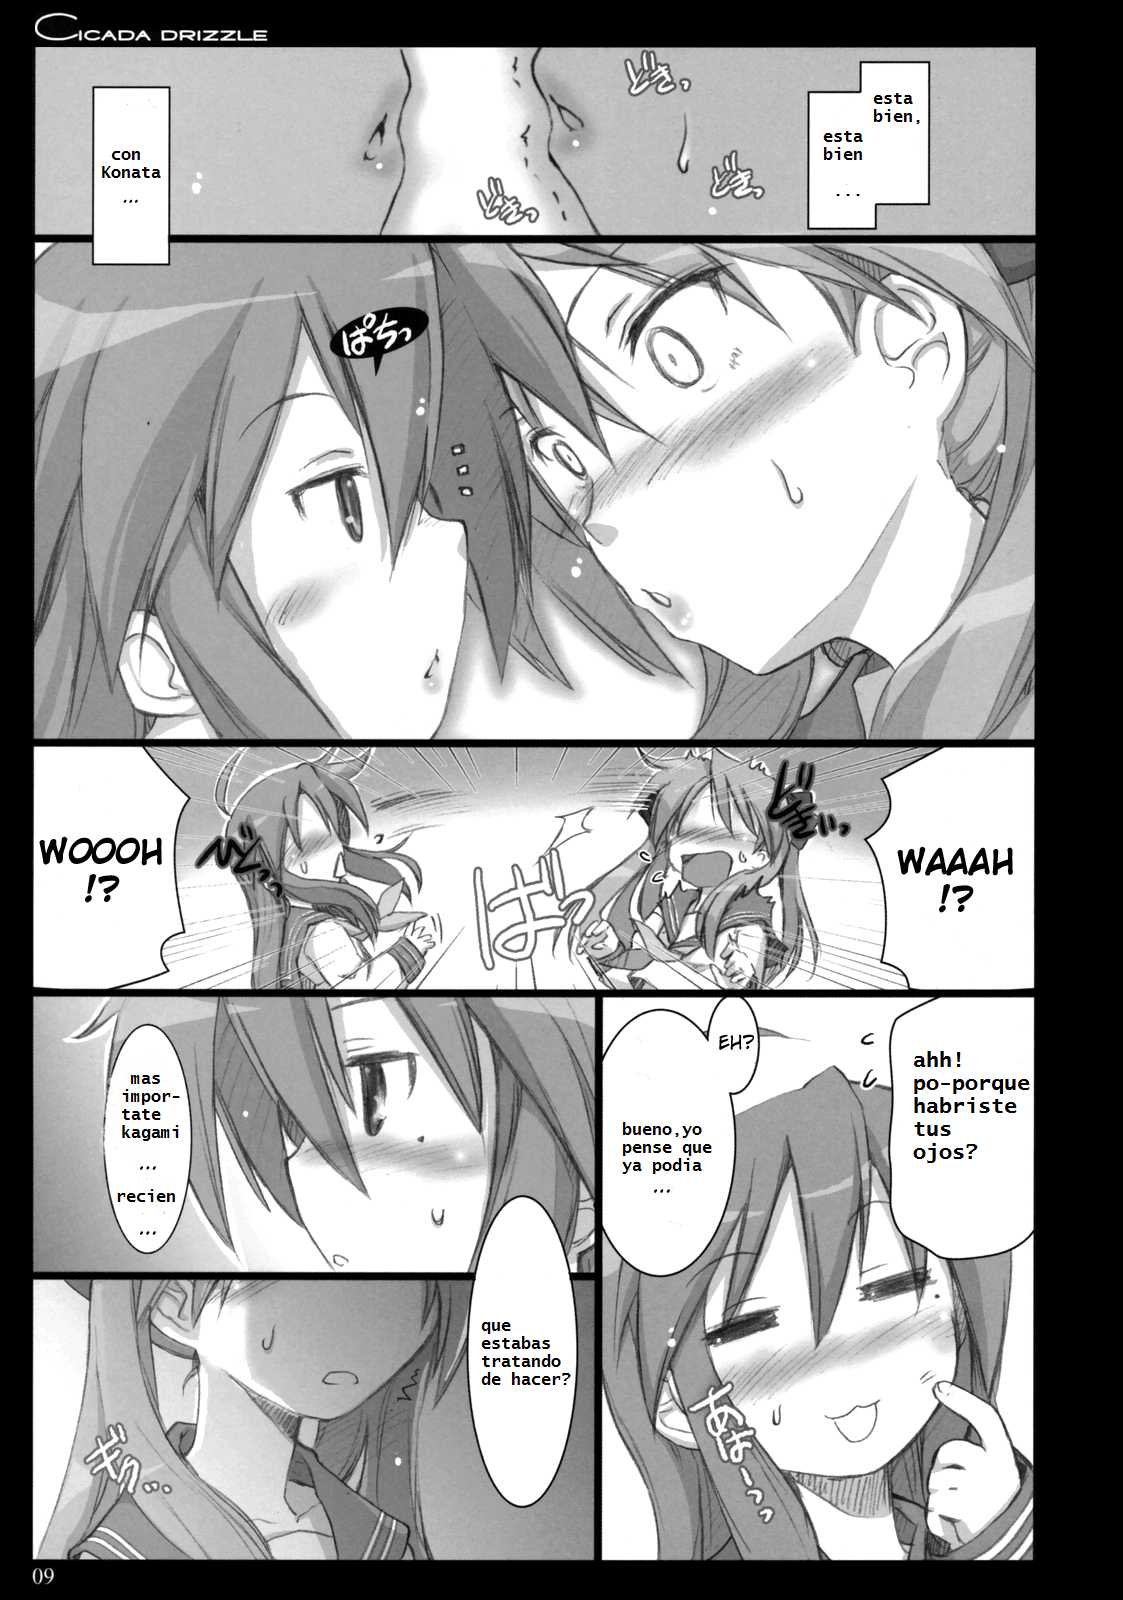 cicada drizzle (doujins lucky star) [by RemSIR] 